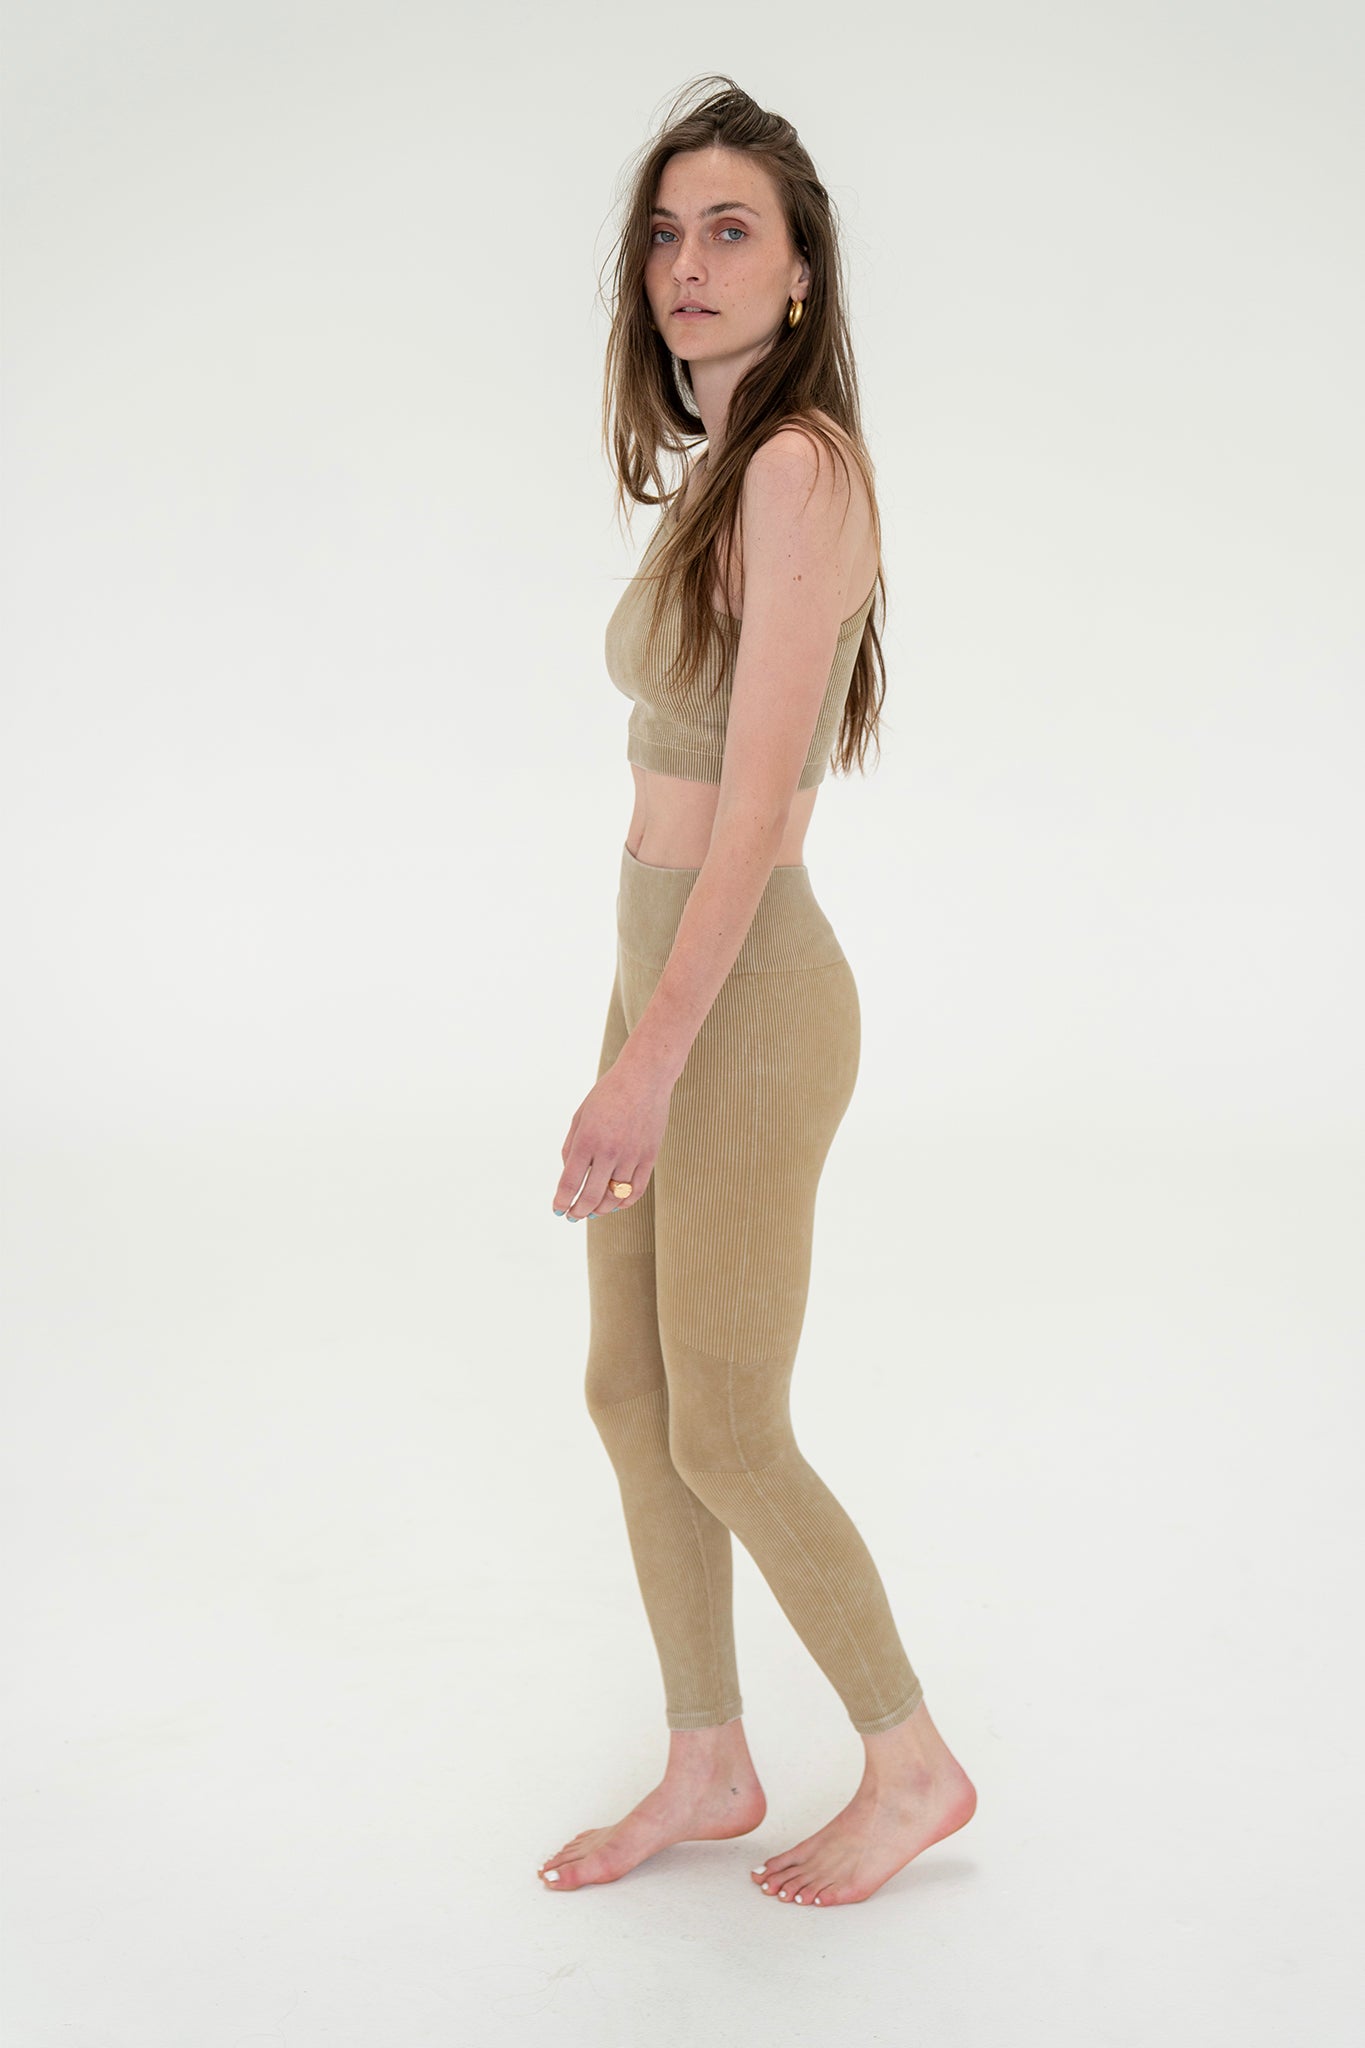 View 3 of Mono Ribbed Cropped Tank, a Tops from Larrea Cove. Detail: .